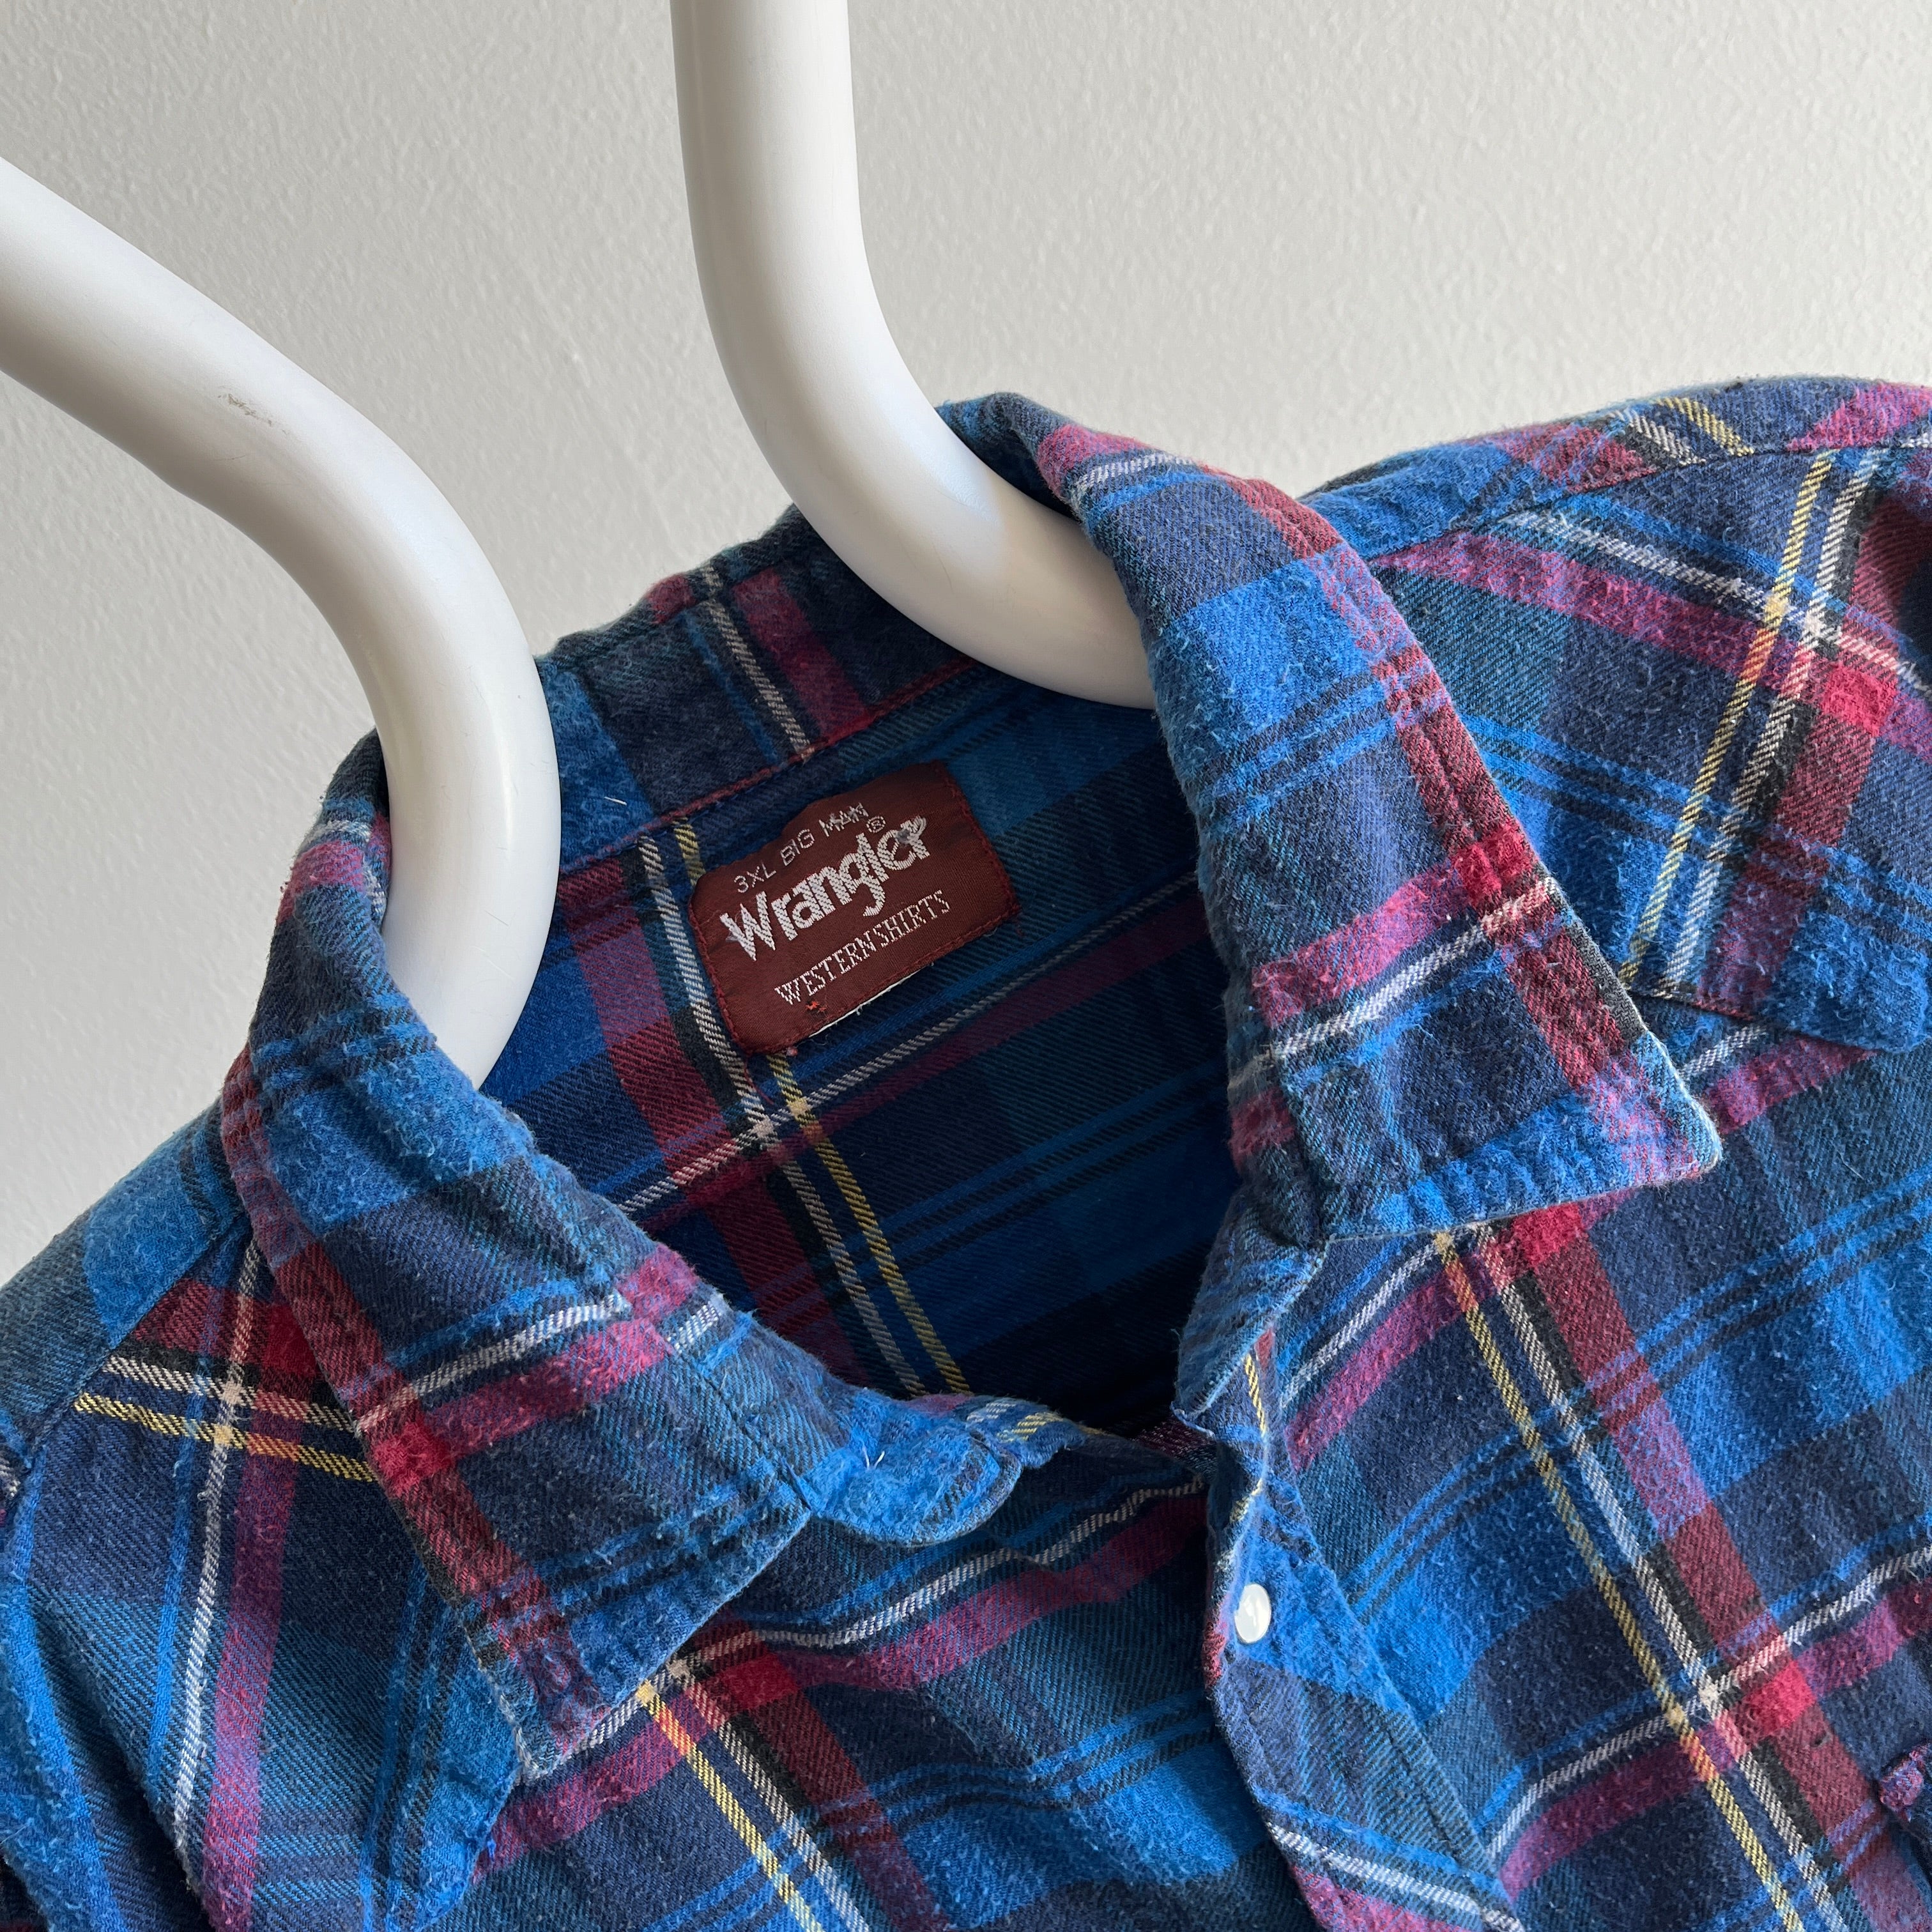 1990s Blue and Red Soft Lightweight Wrangler Western Flannel